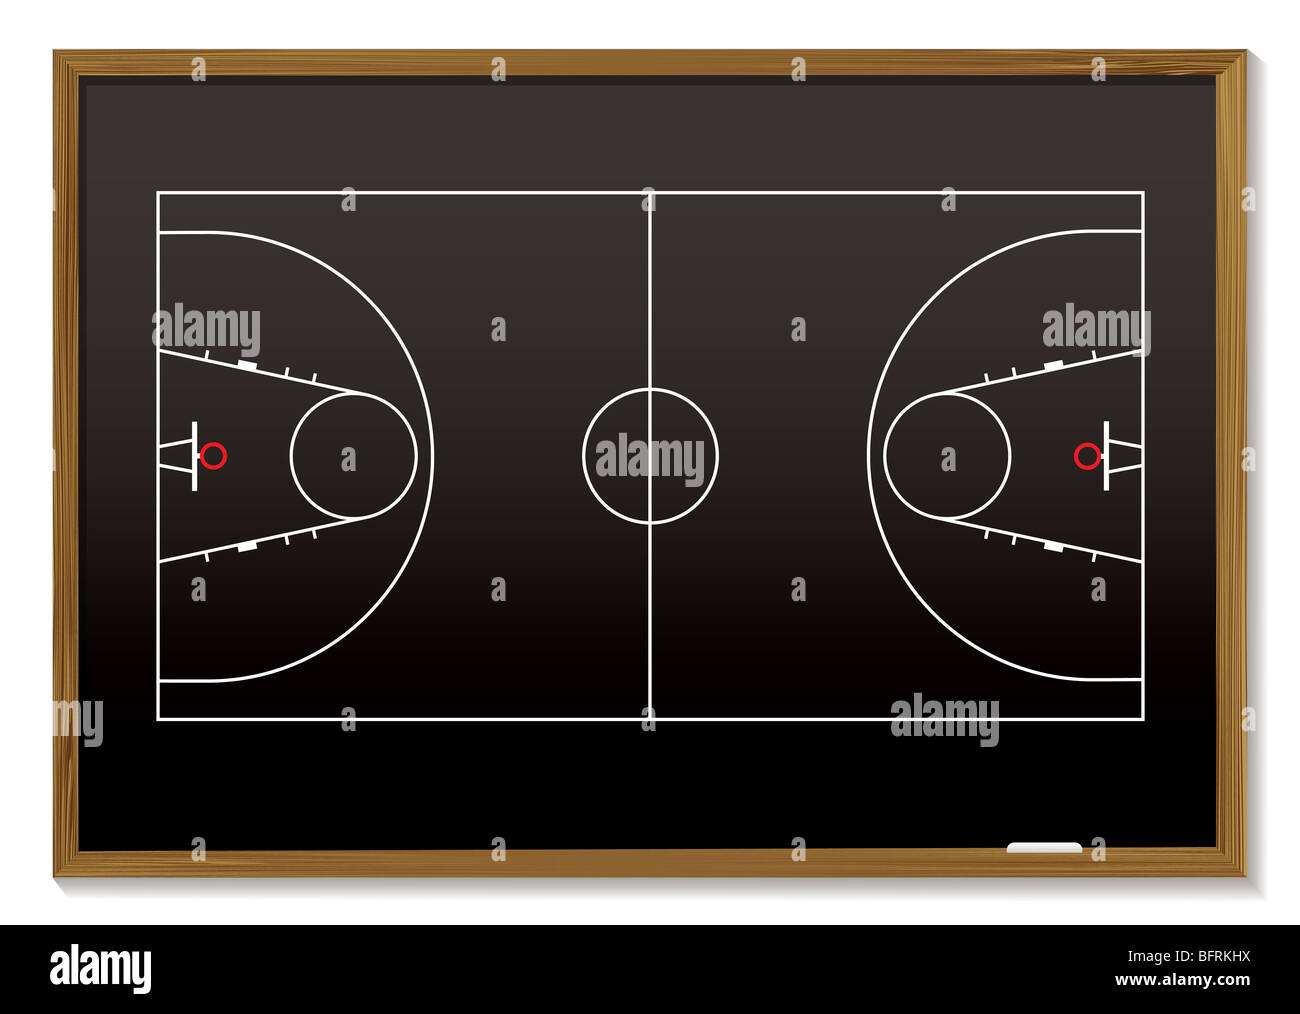 black board with outline of basketball court ideal for strategy Stock Photo